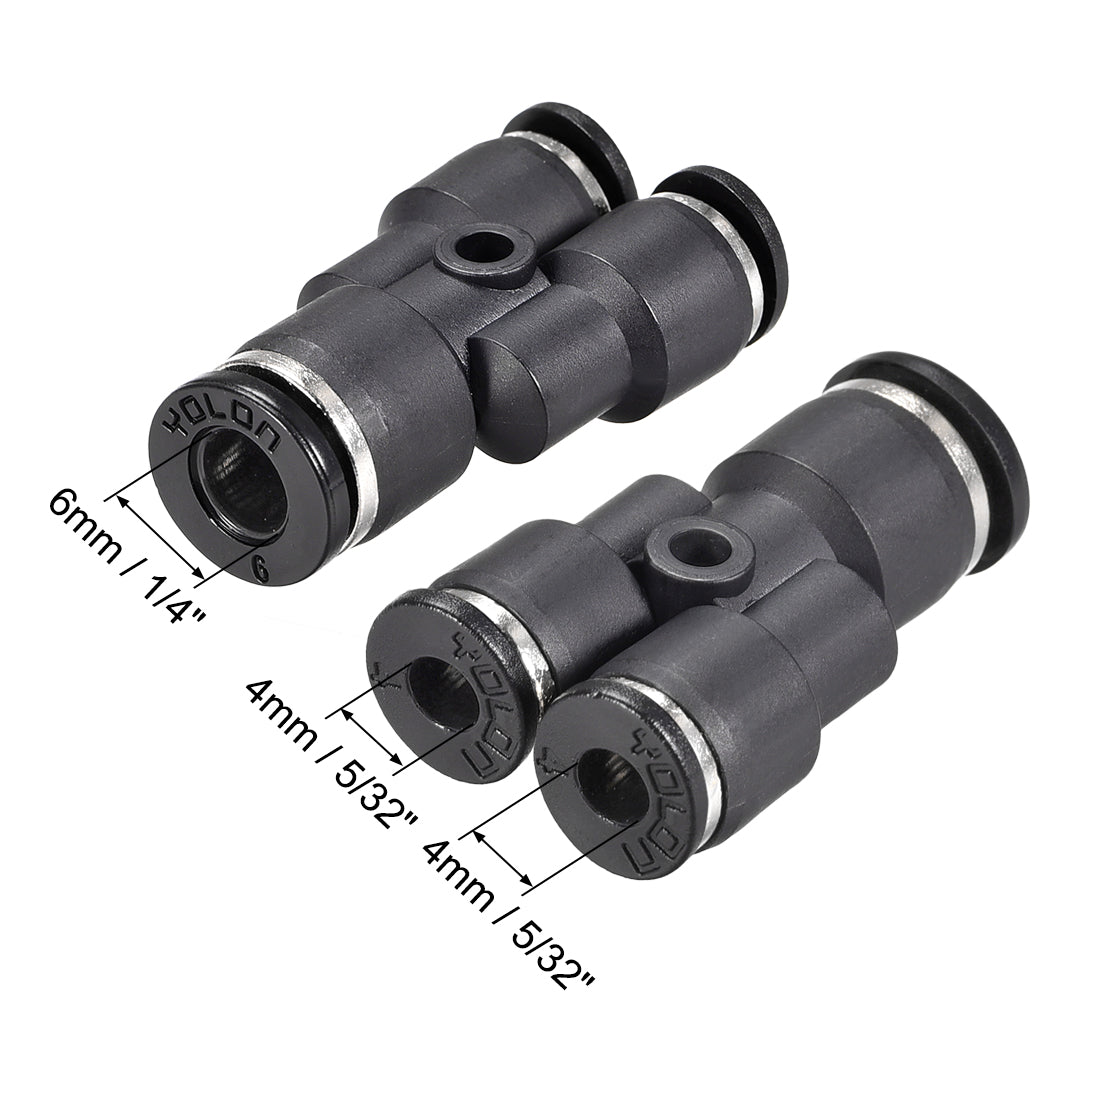 uxcell Uxcell Plastic Connect Y Splitter Push To Tube Fittings 6mm X 4mm OD Push Lock 2pcs